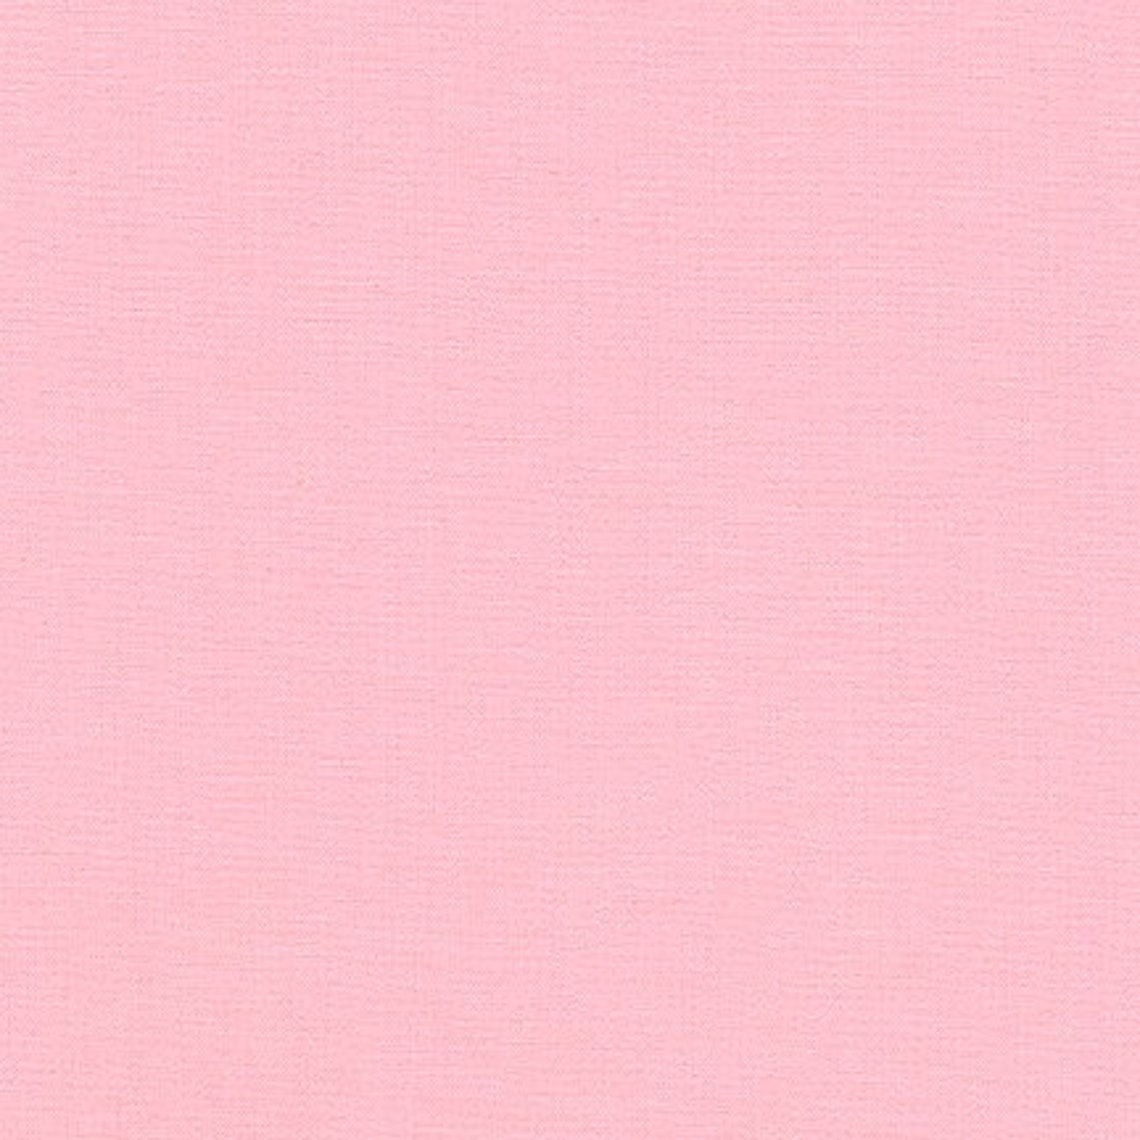 Baby Pink Kona Cotton Solids From Robert Kaufman Sold By Etsy